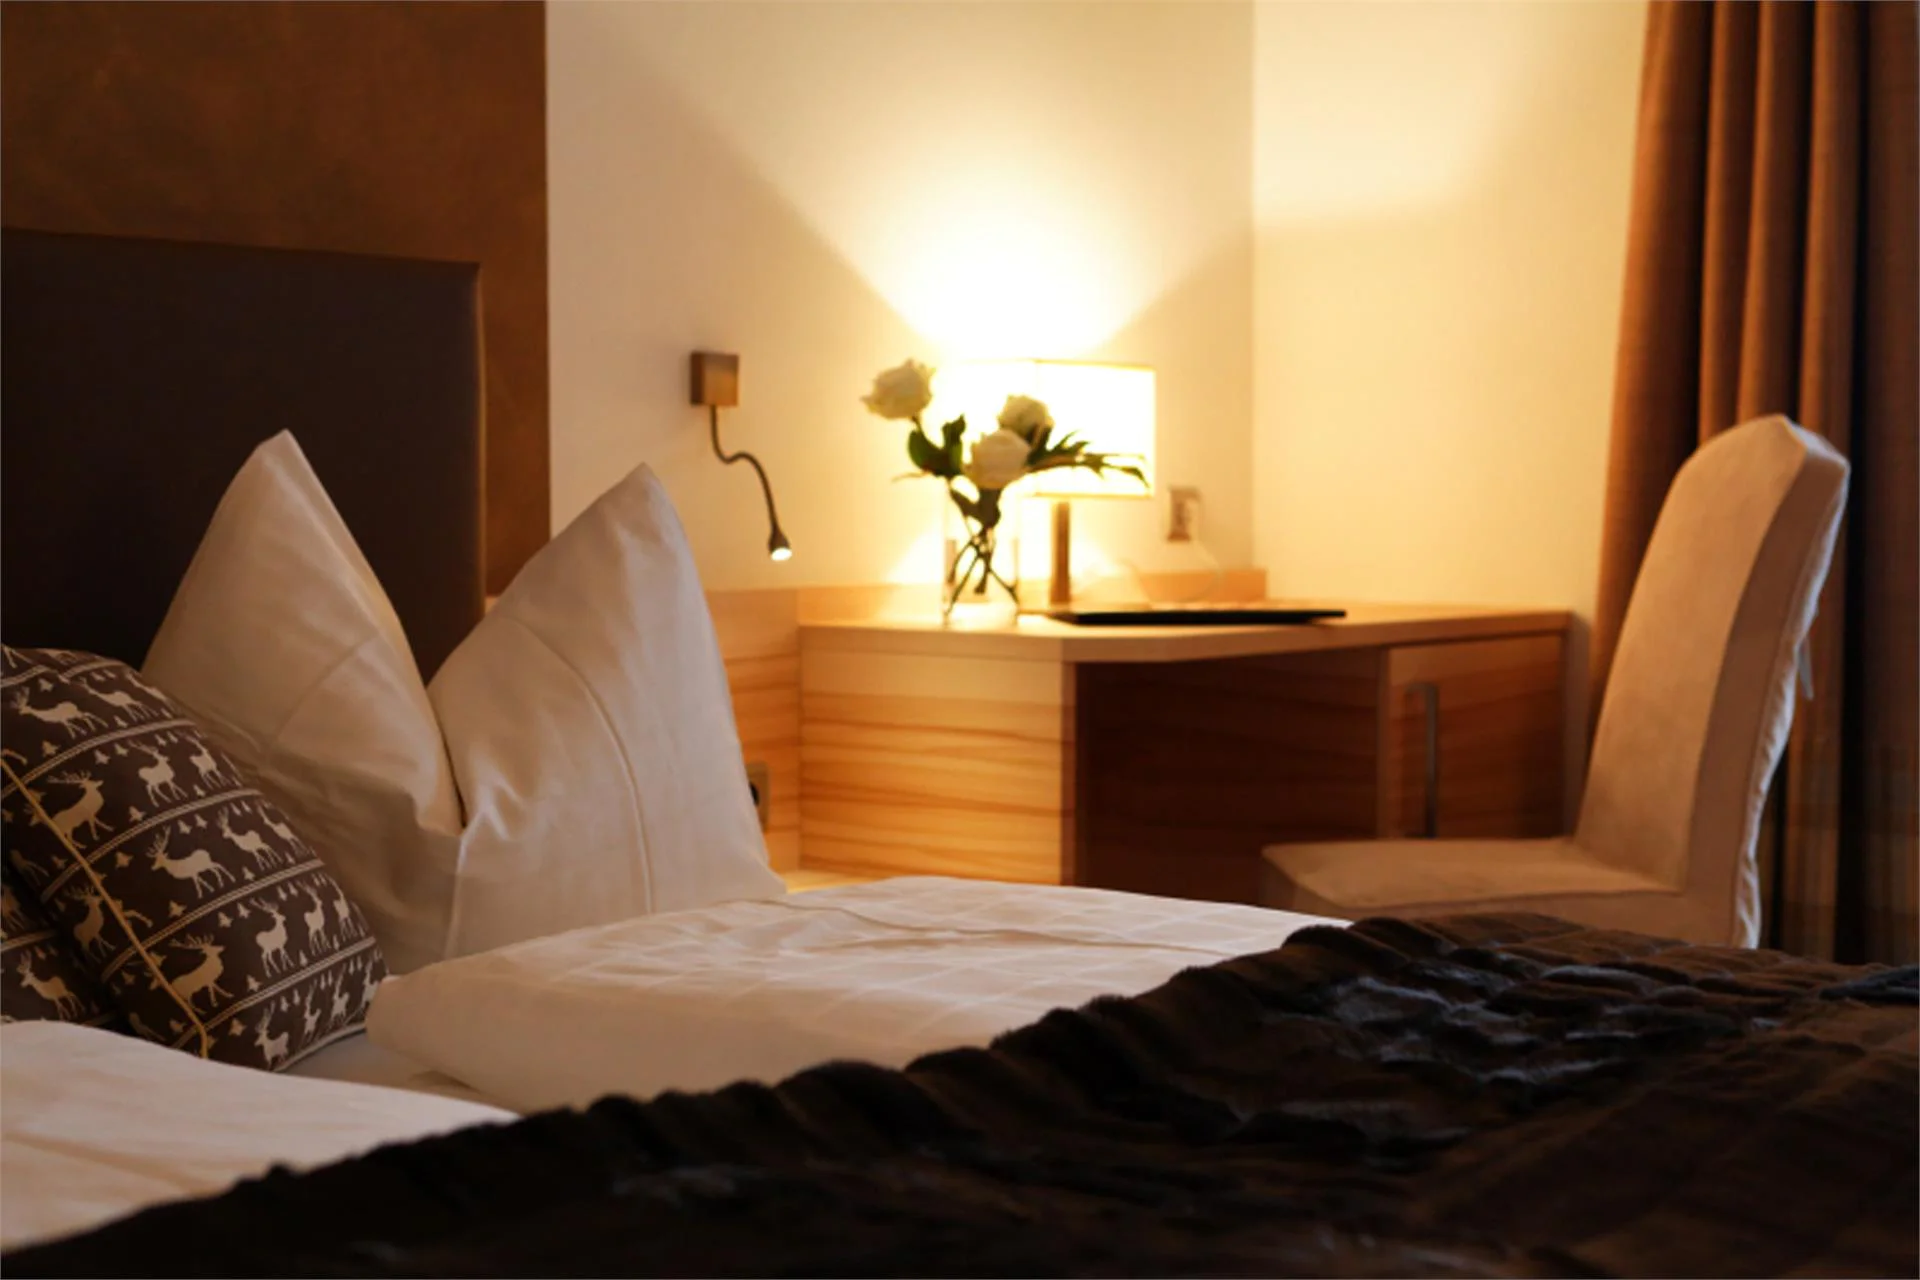 Residence Hotel Alpinum Sand in Taufers/Campo Tures 31 suedtirol.info